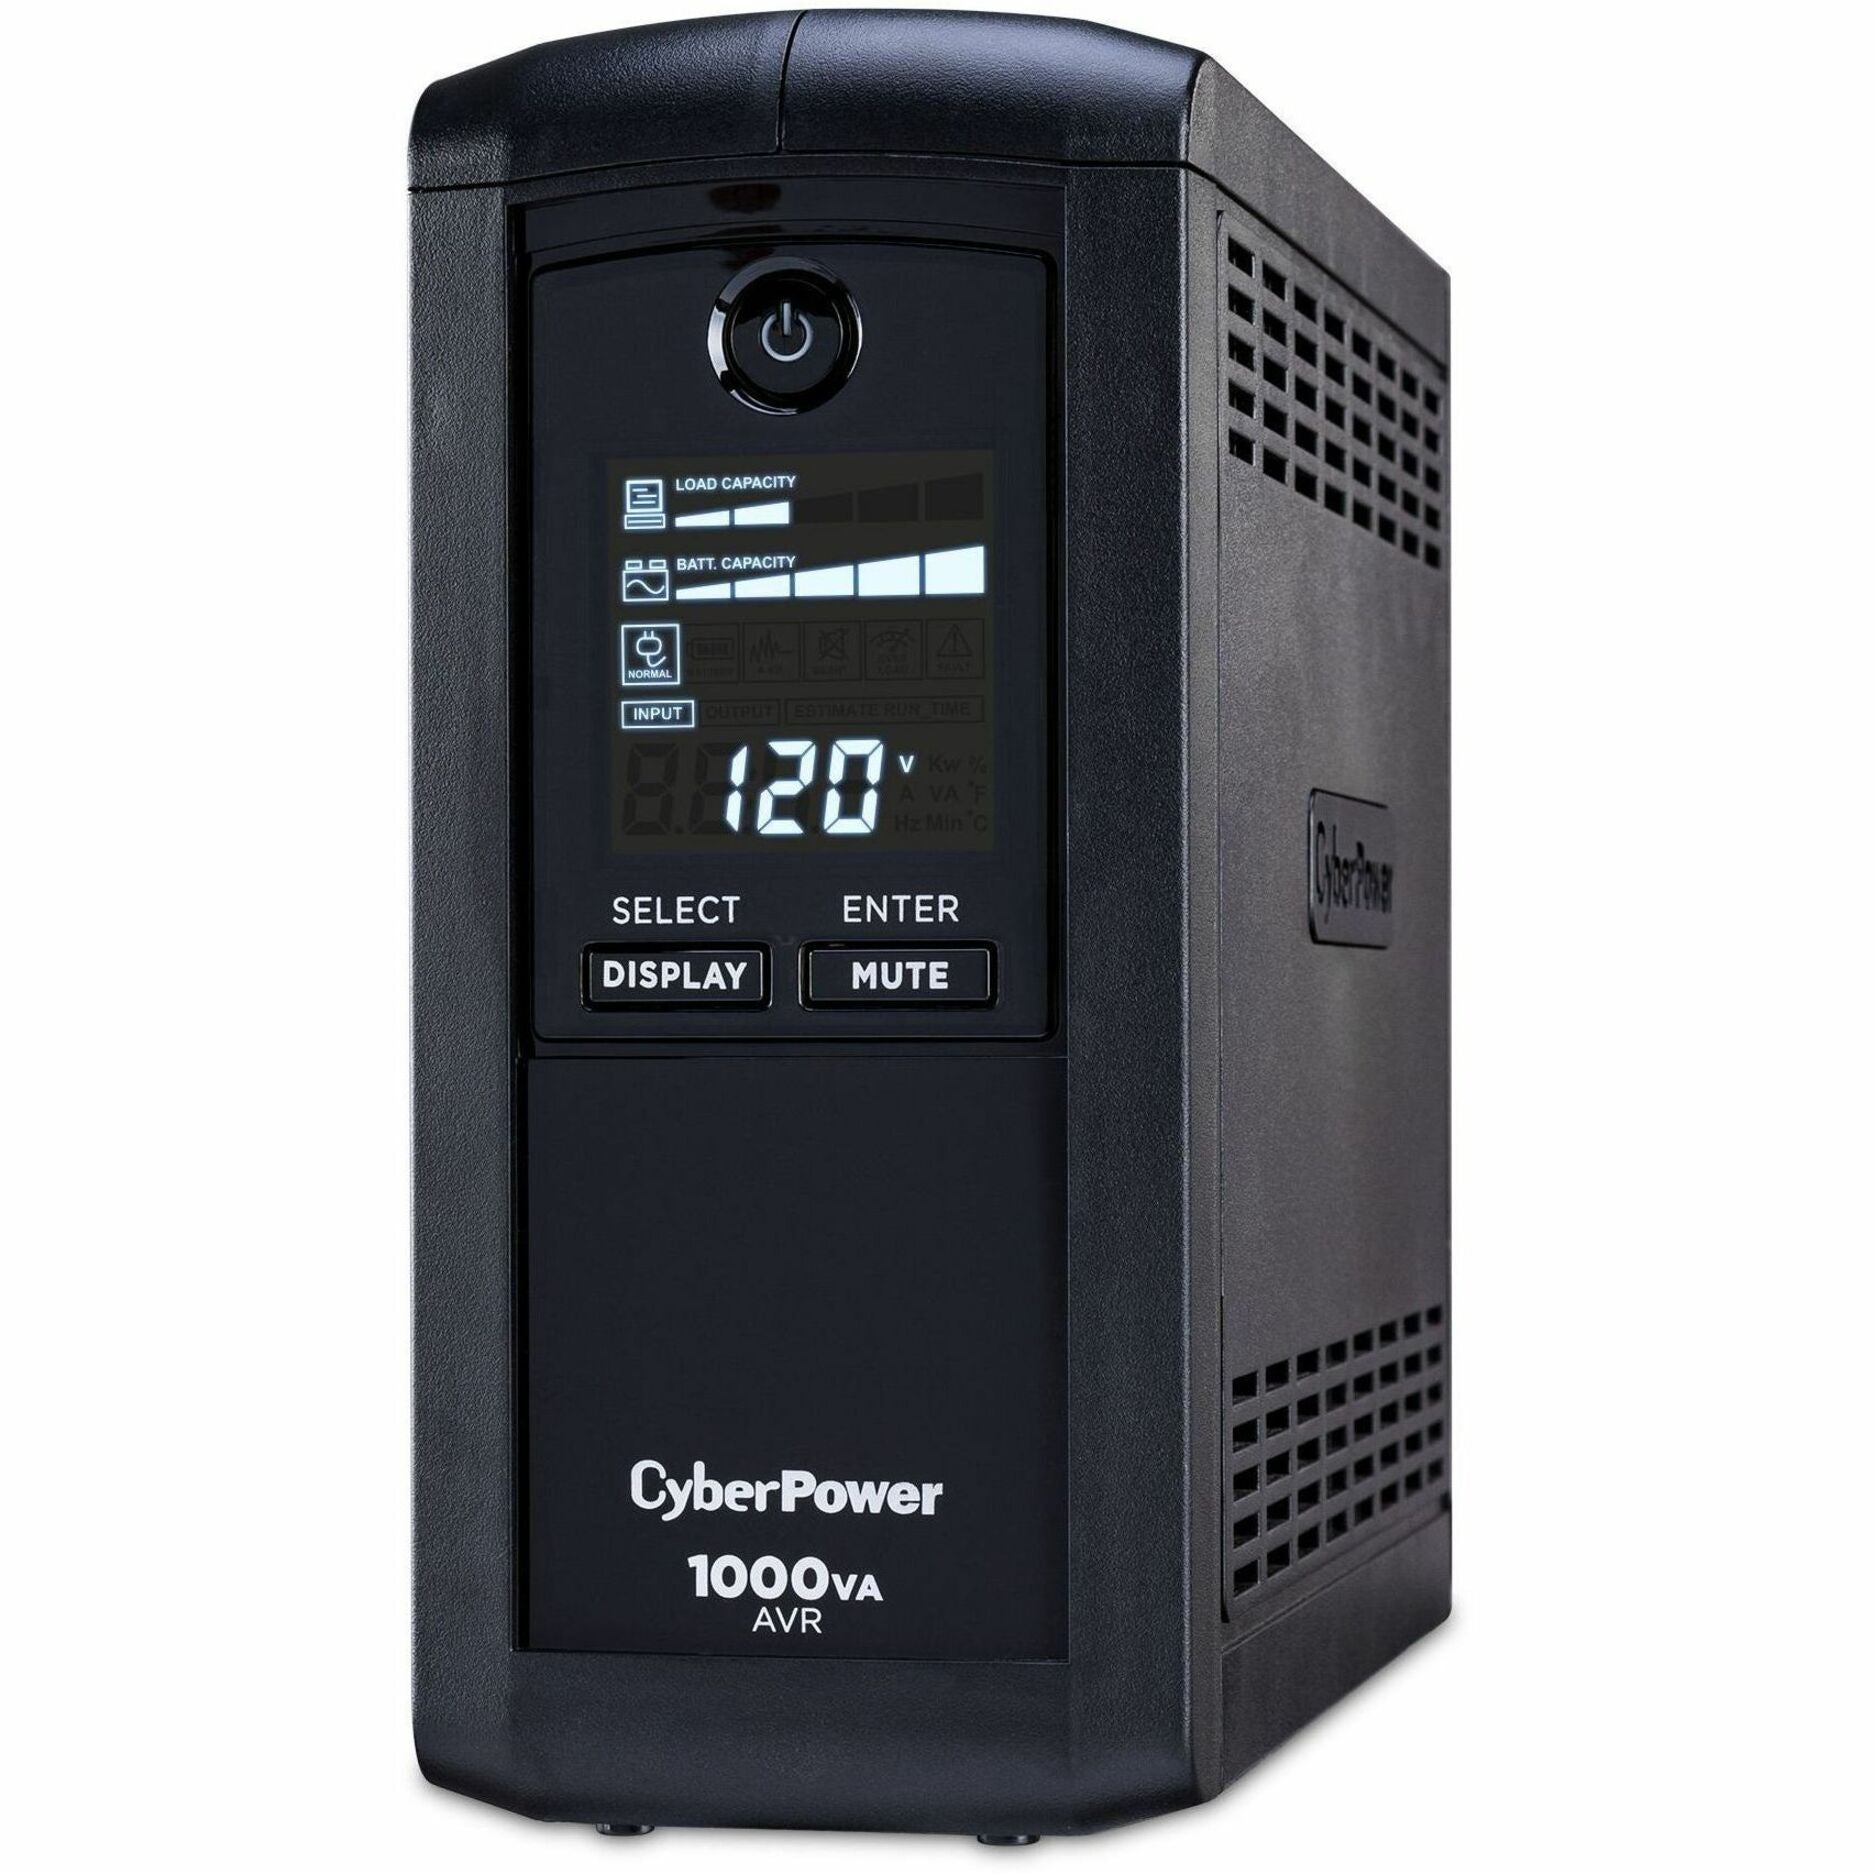 CyberPower CP1000AVRLCD Intelligent LCD UPS Systems, 1000VA Tower UPS, 3-Year Warranty, Energy Star Certified